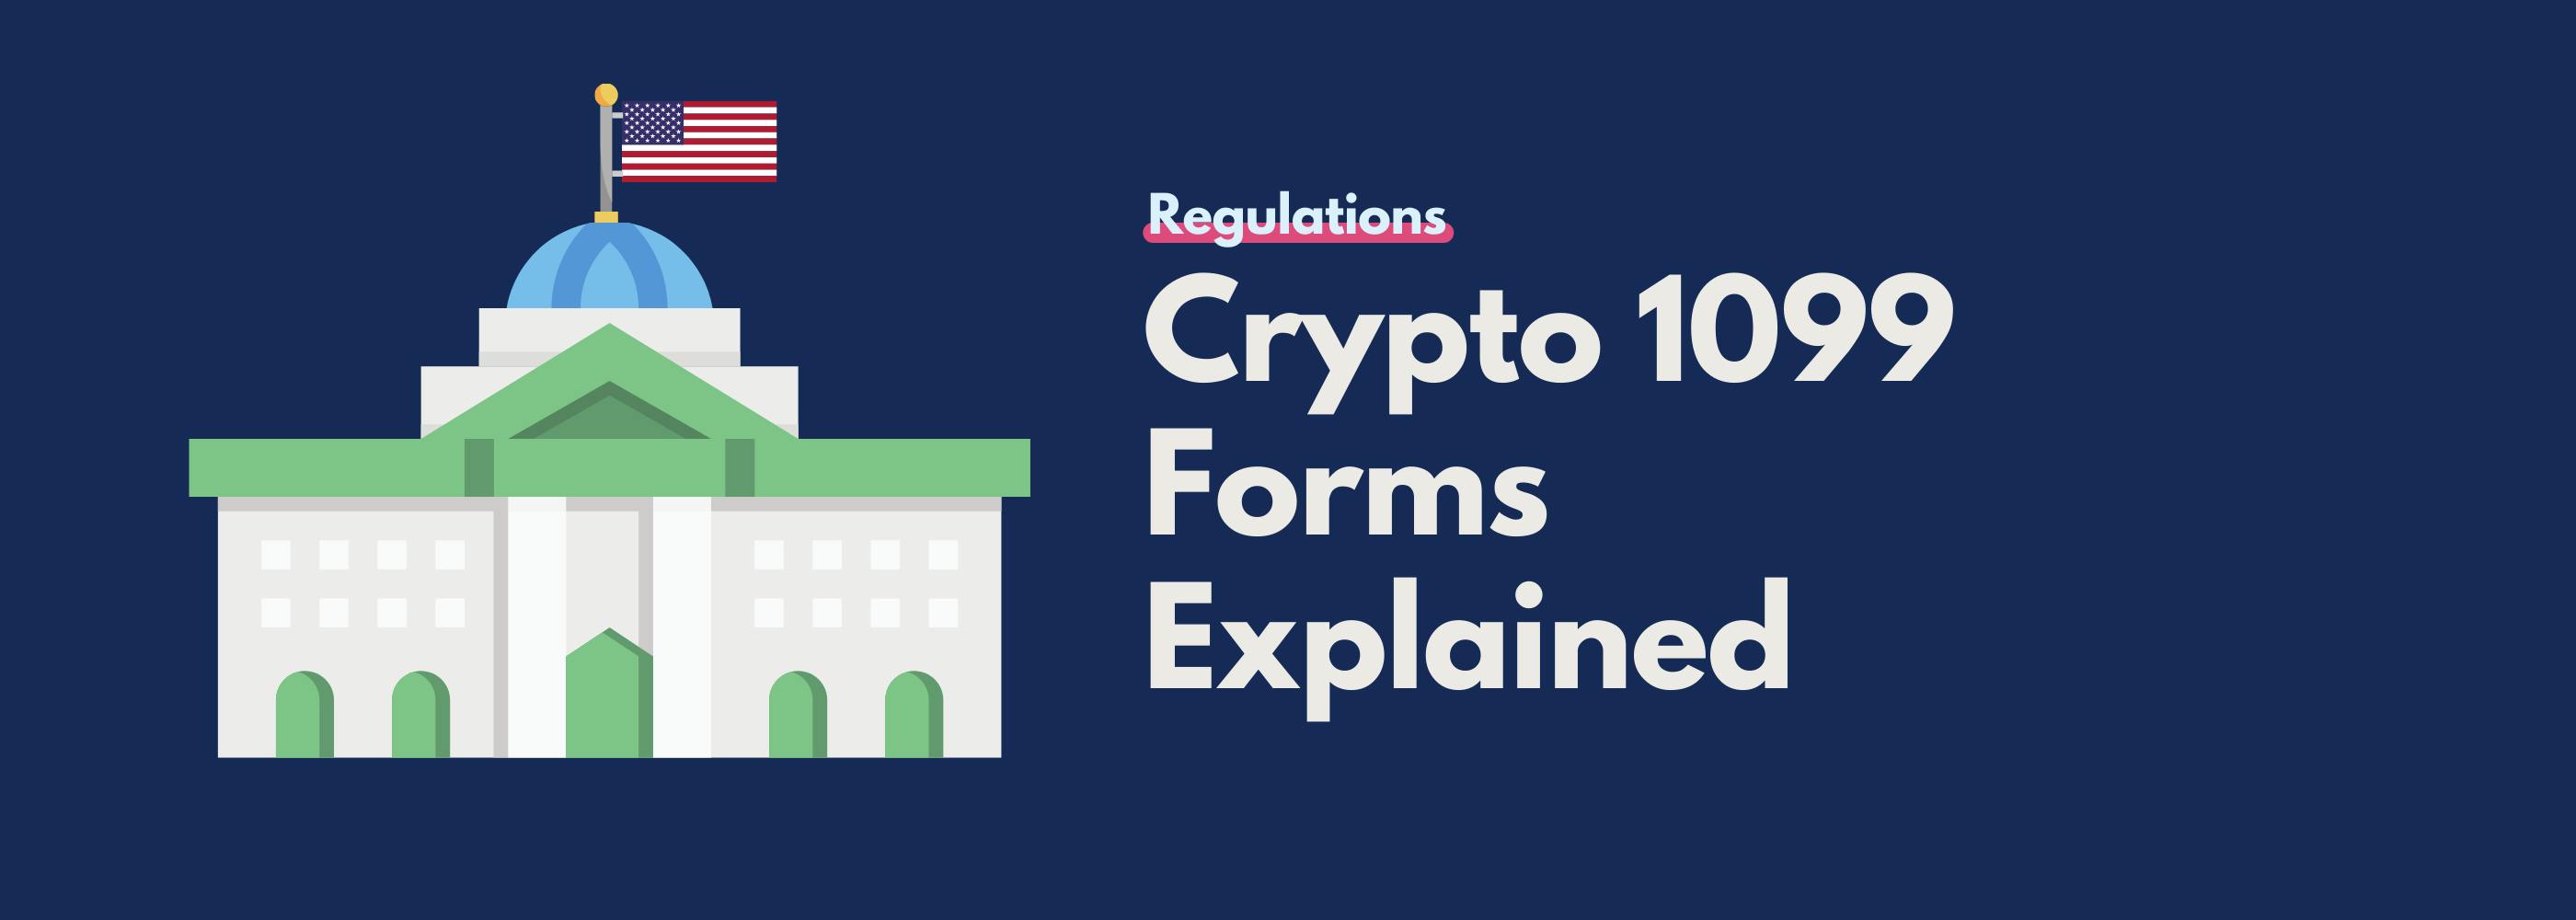 Crypto 1099 Forms Explained